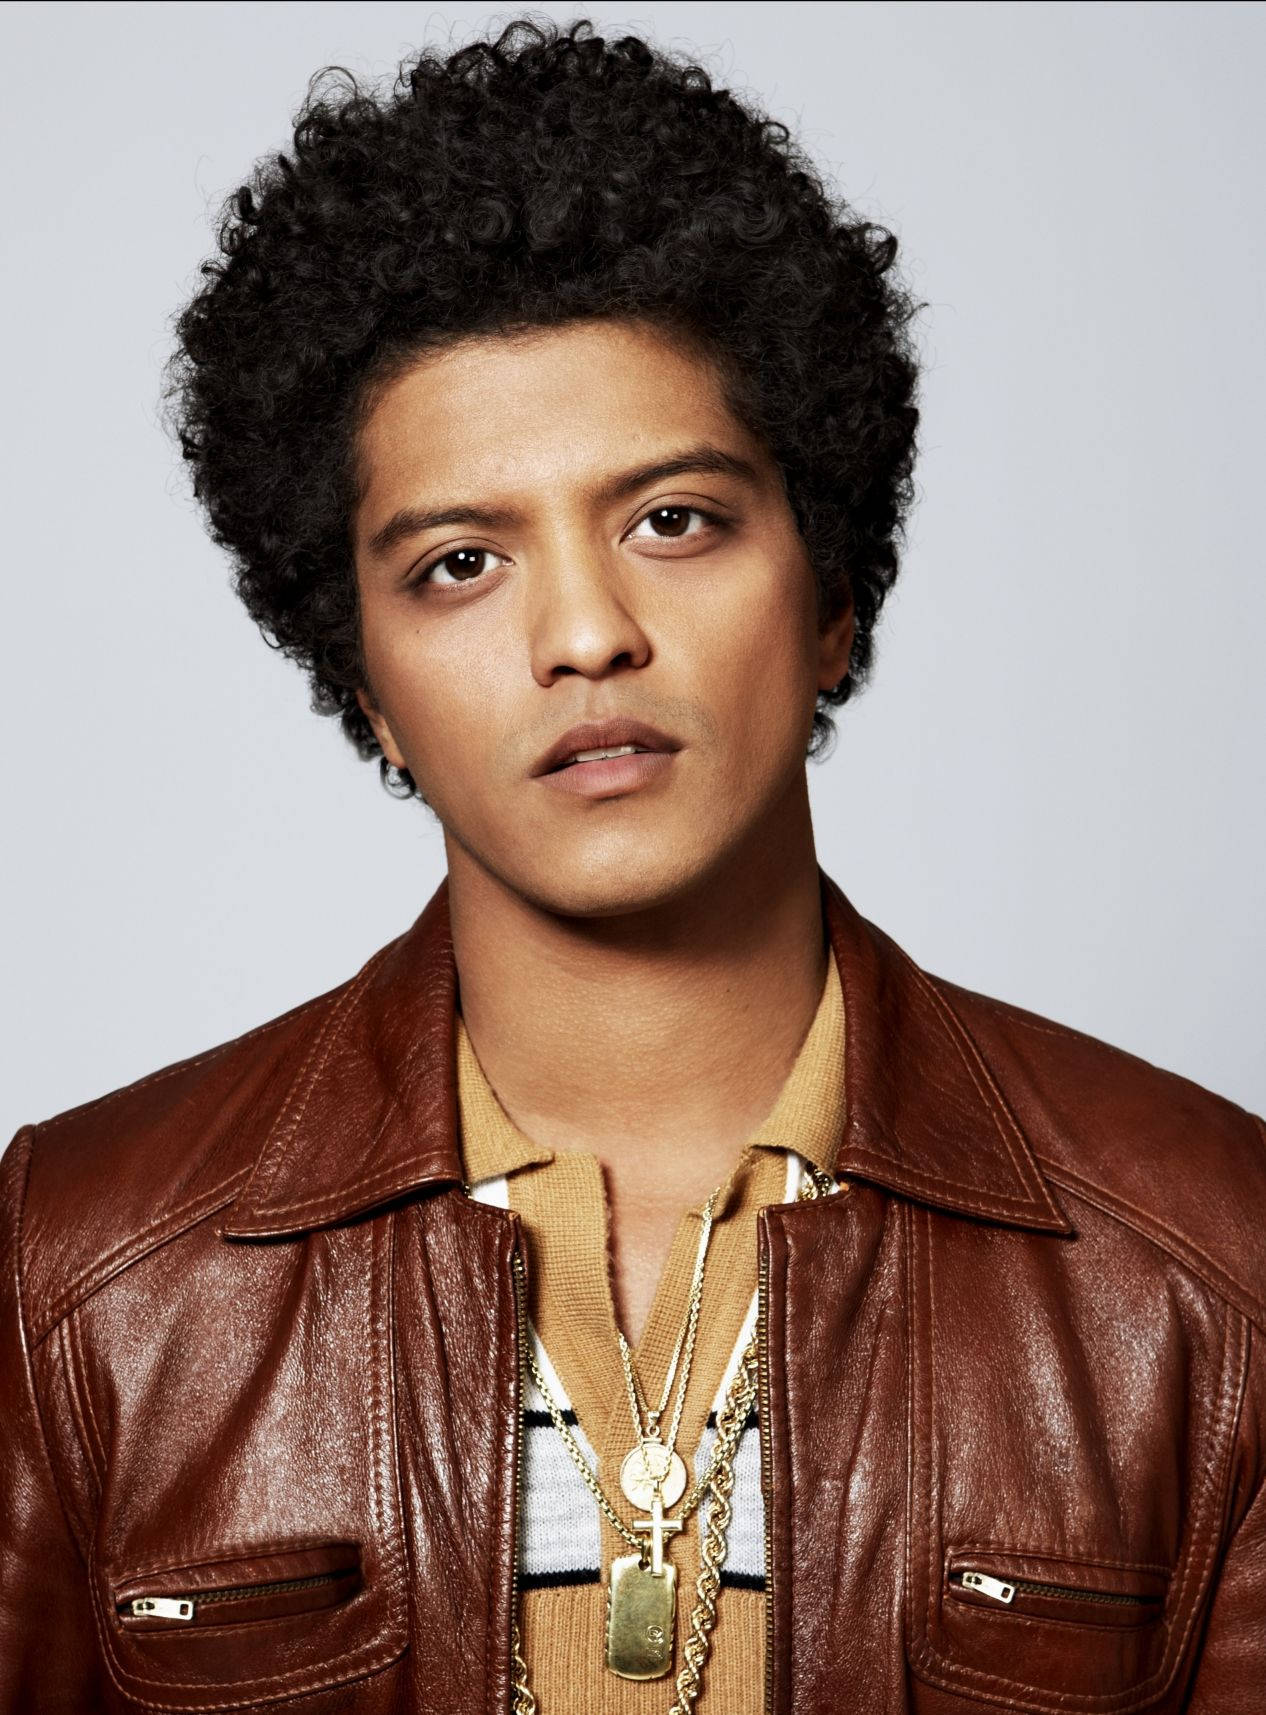 Bruno Mars Radiating Energy With An Impressive Afro. Background